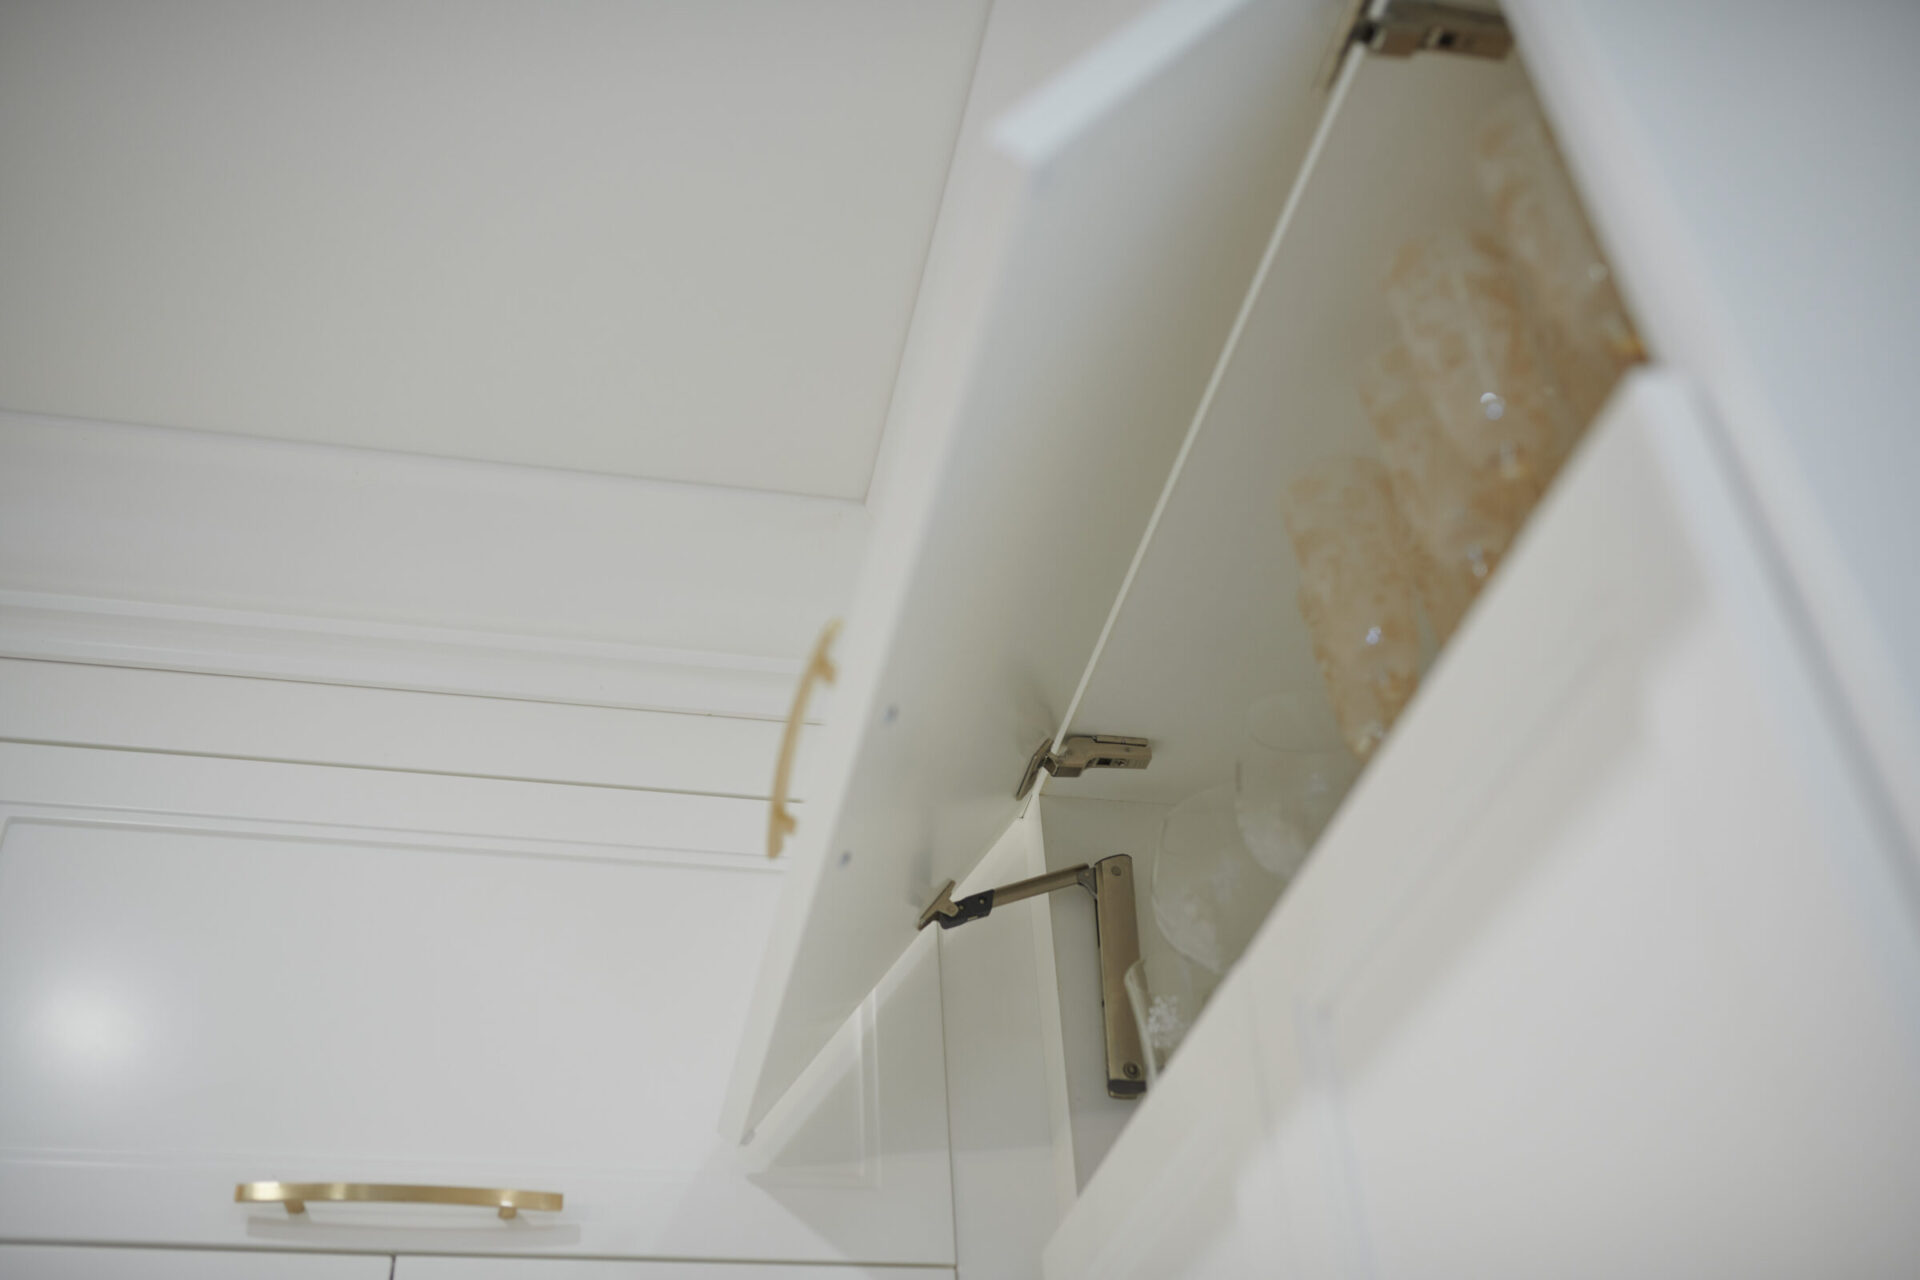 This image shows an open white cabinet with a golden handle. Inside, it appears to be a water spill or leak on the shelf.